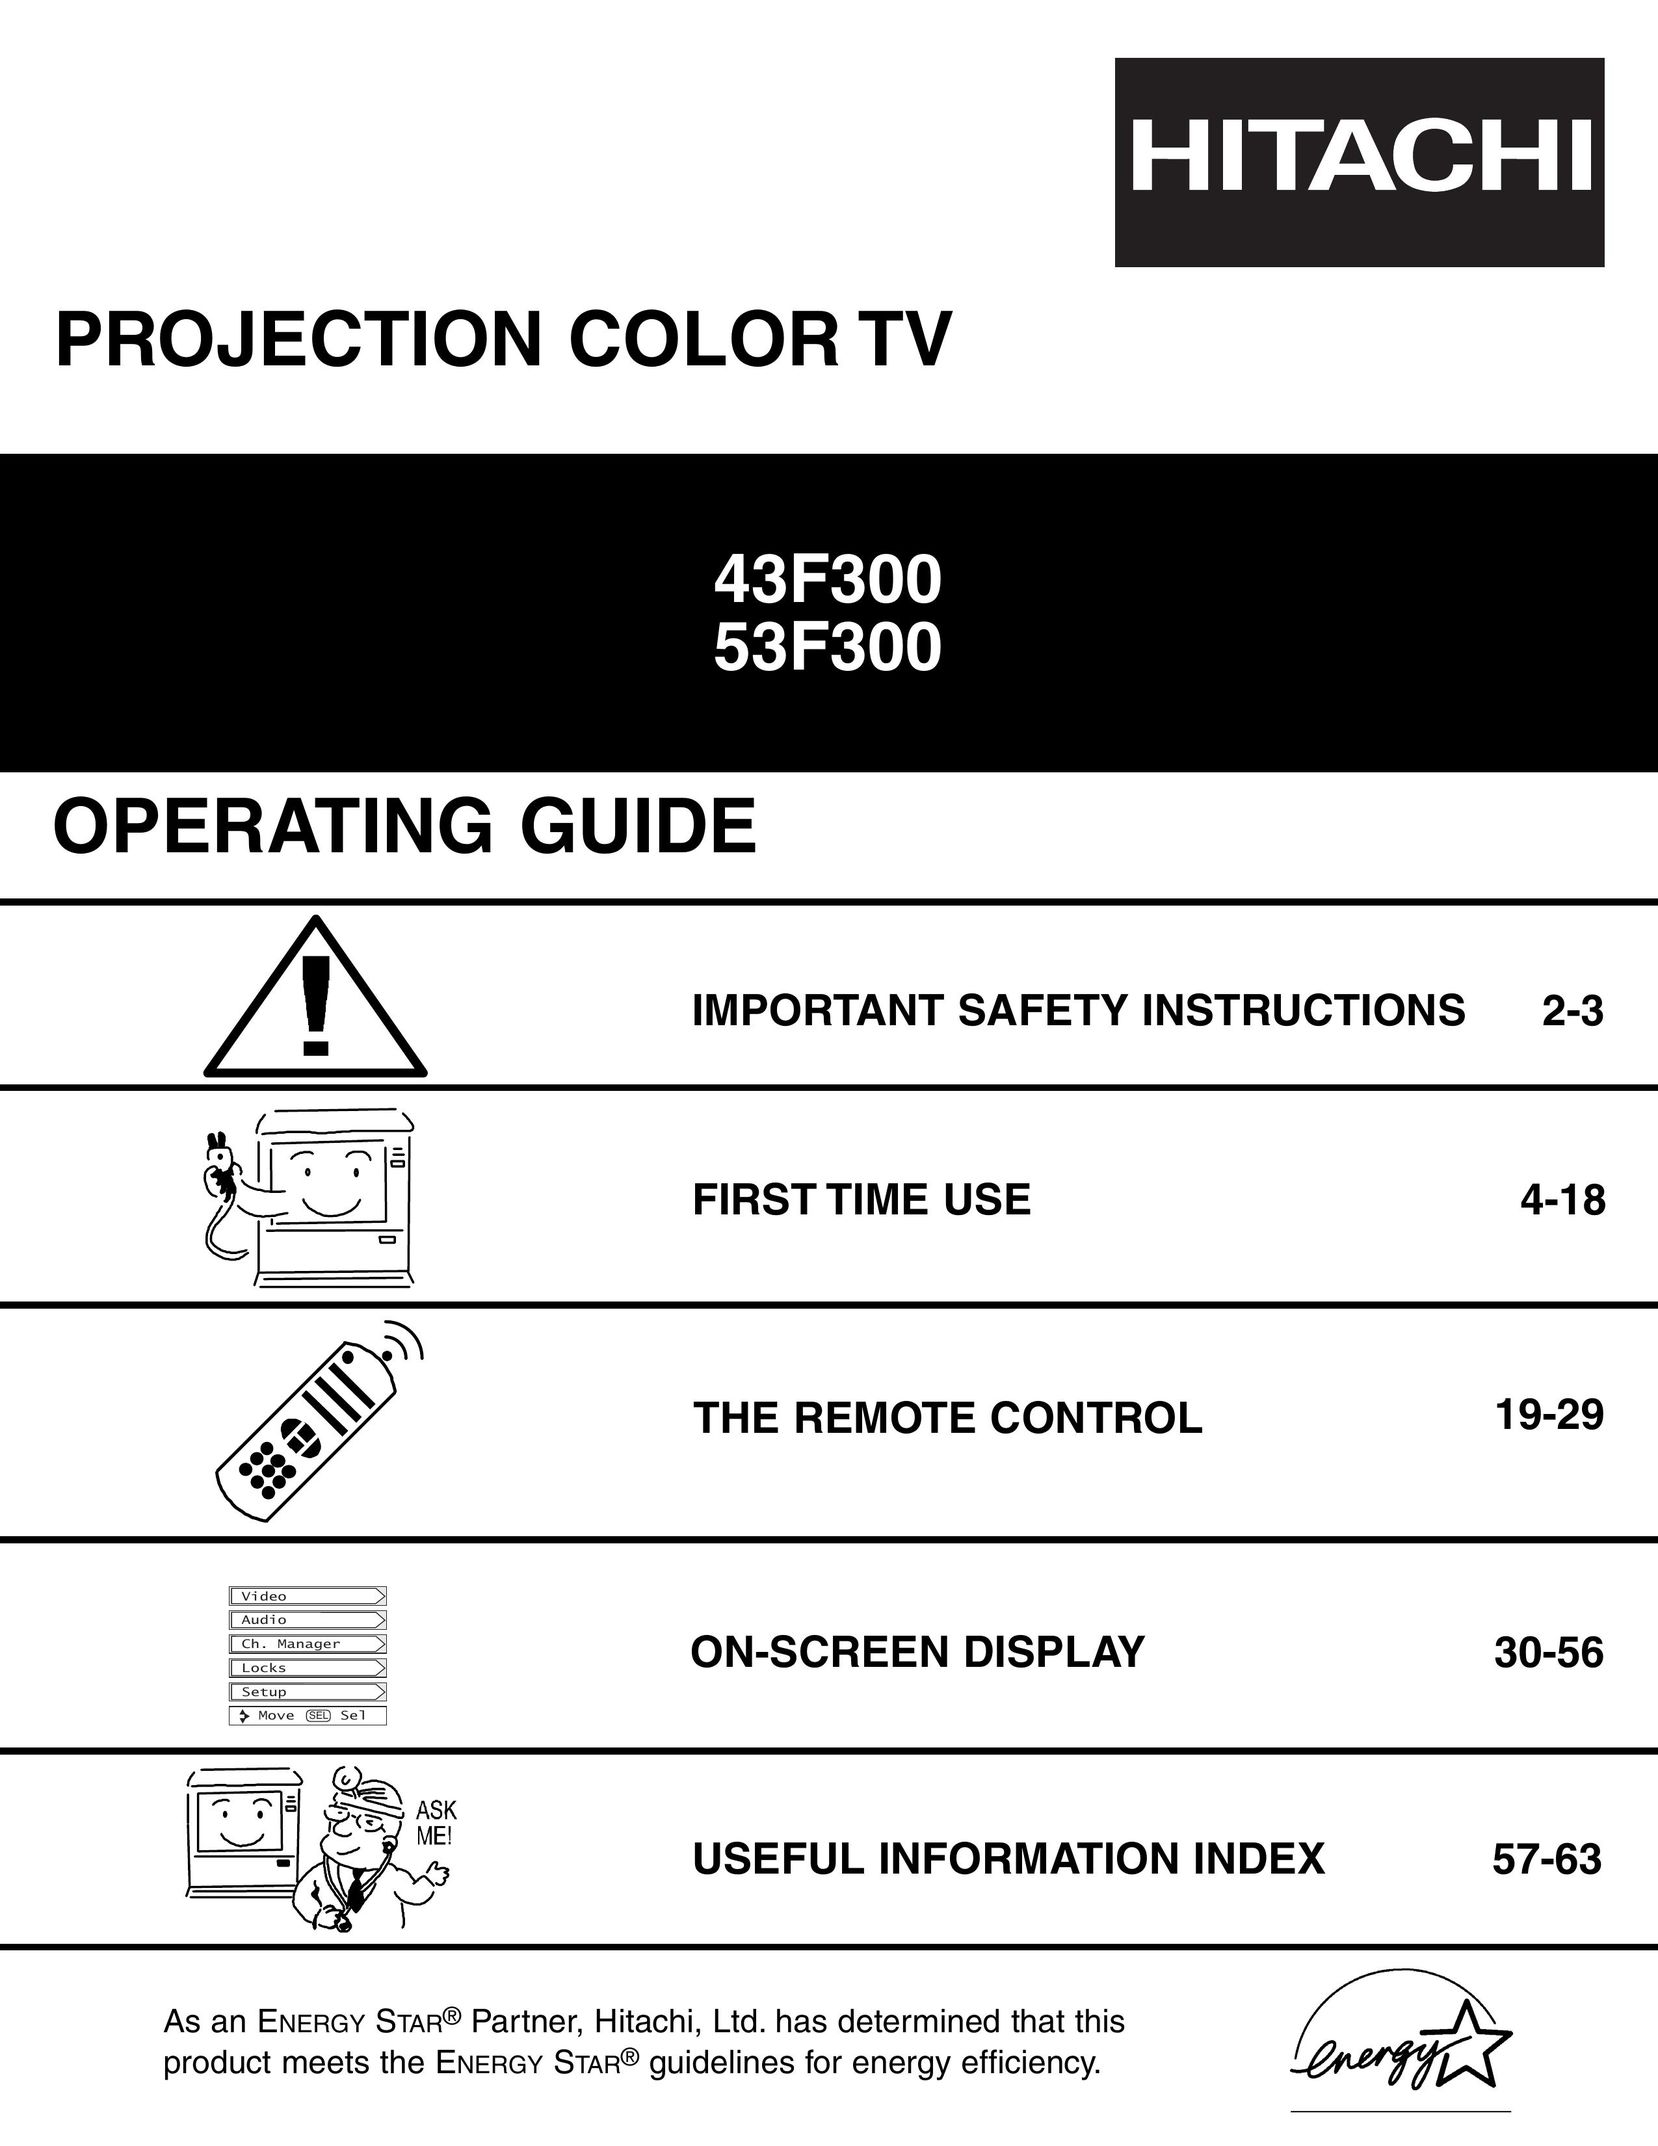 Hitachi 43F300 Projection Television User Manual